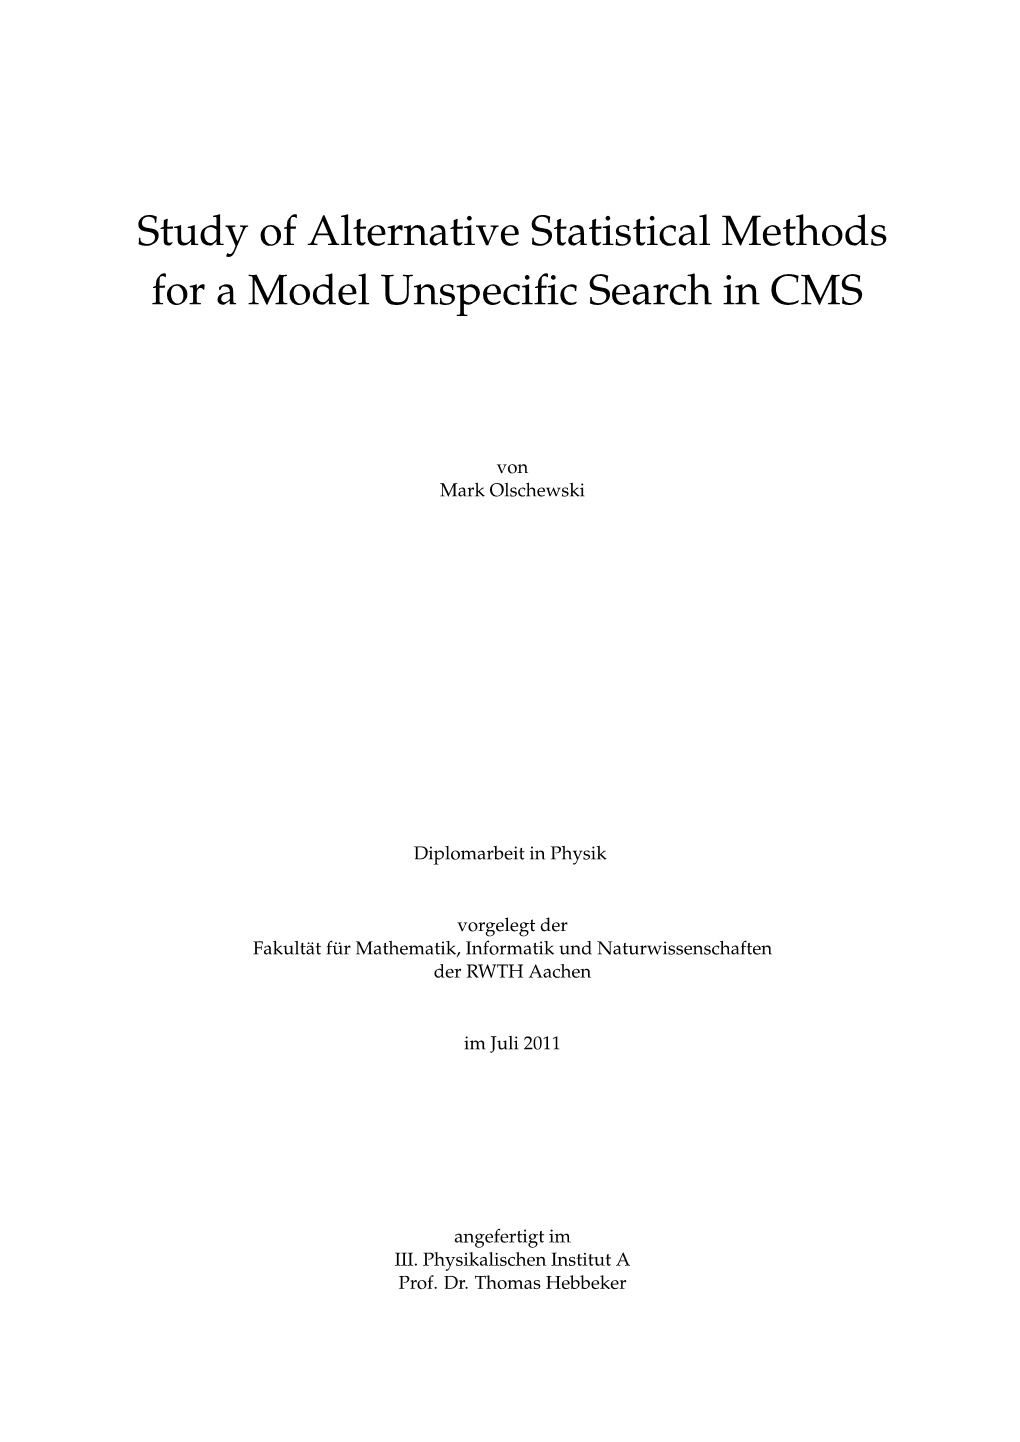 Study of Alternative Statistical Methods for a Model Unspecific